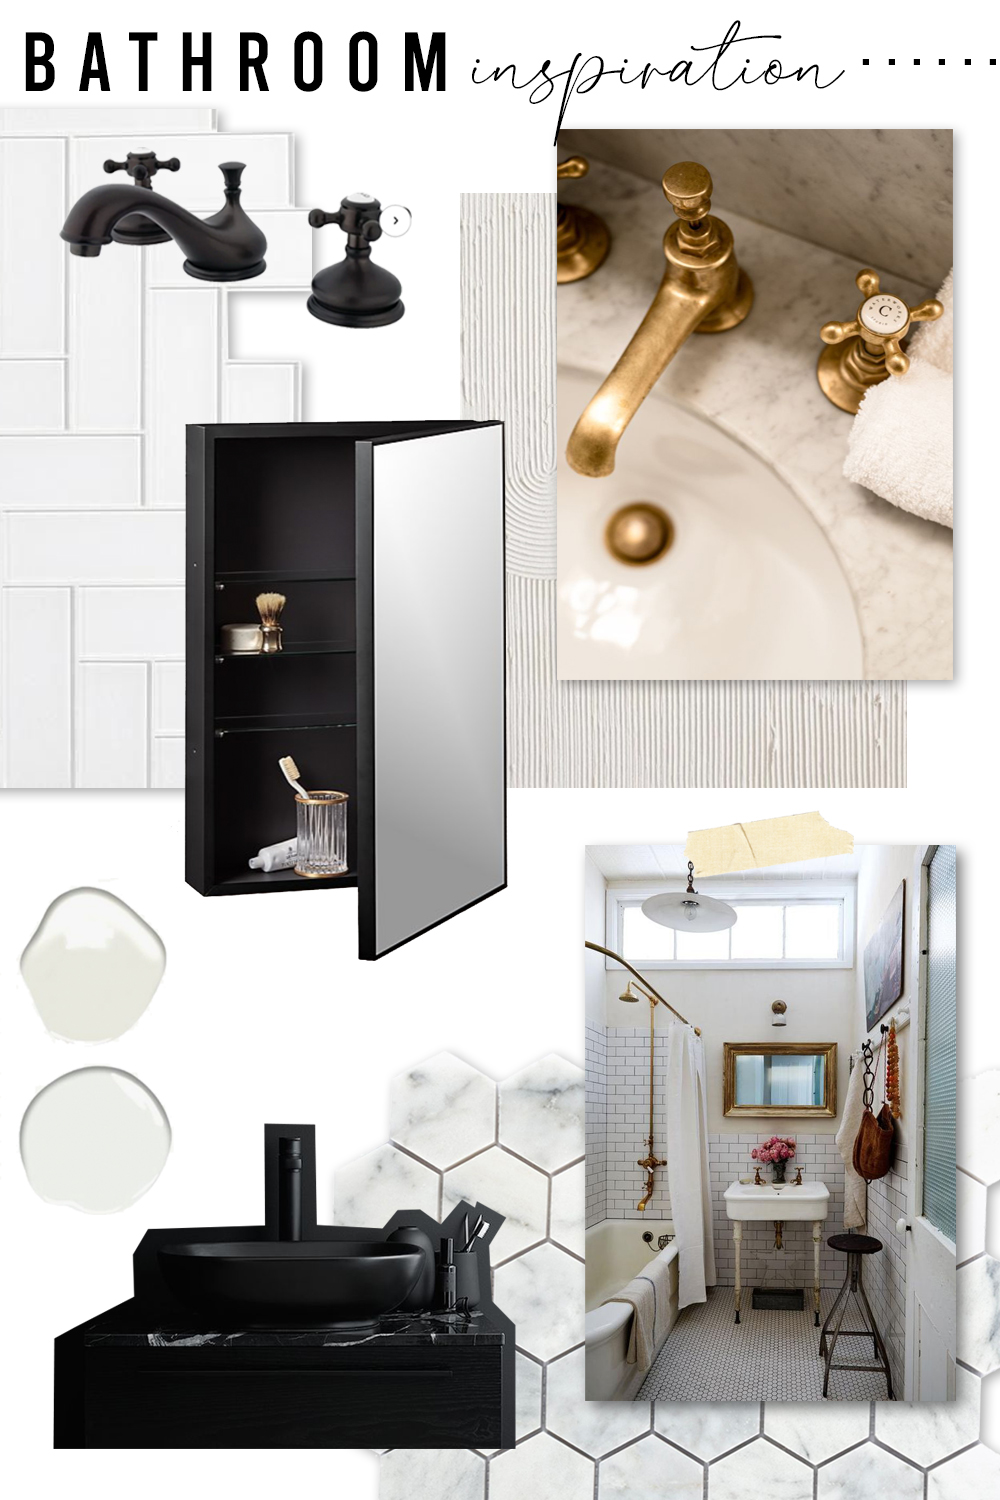 Bathroom Renovation – My Vision for the Space and Sconces!